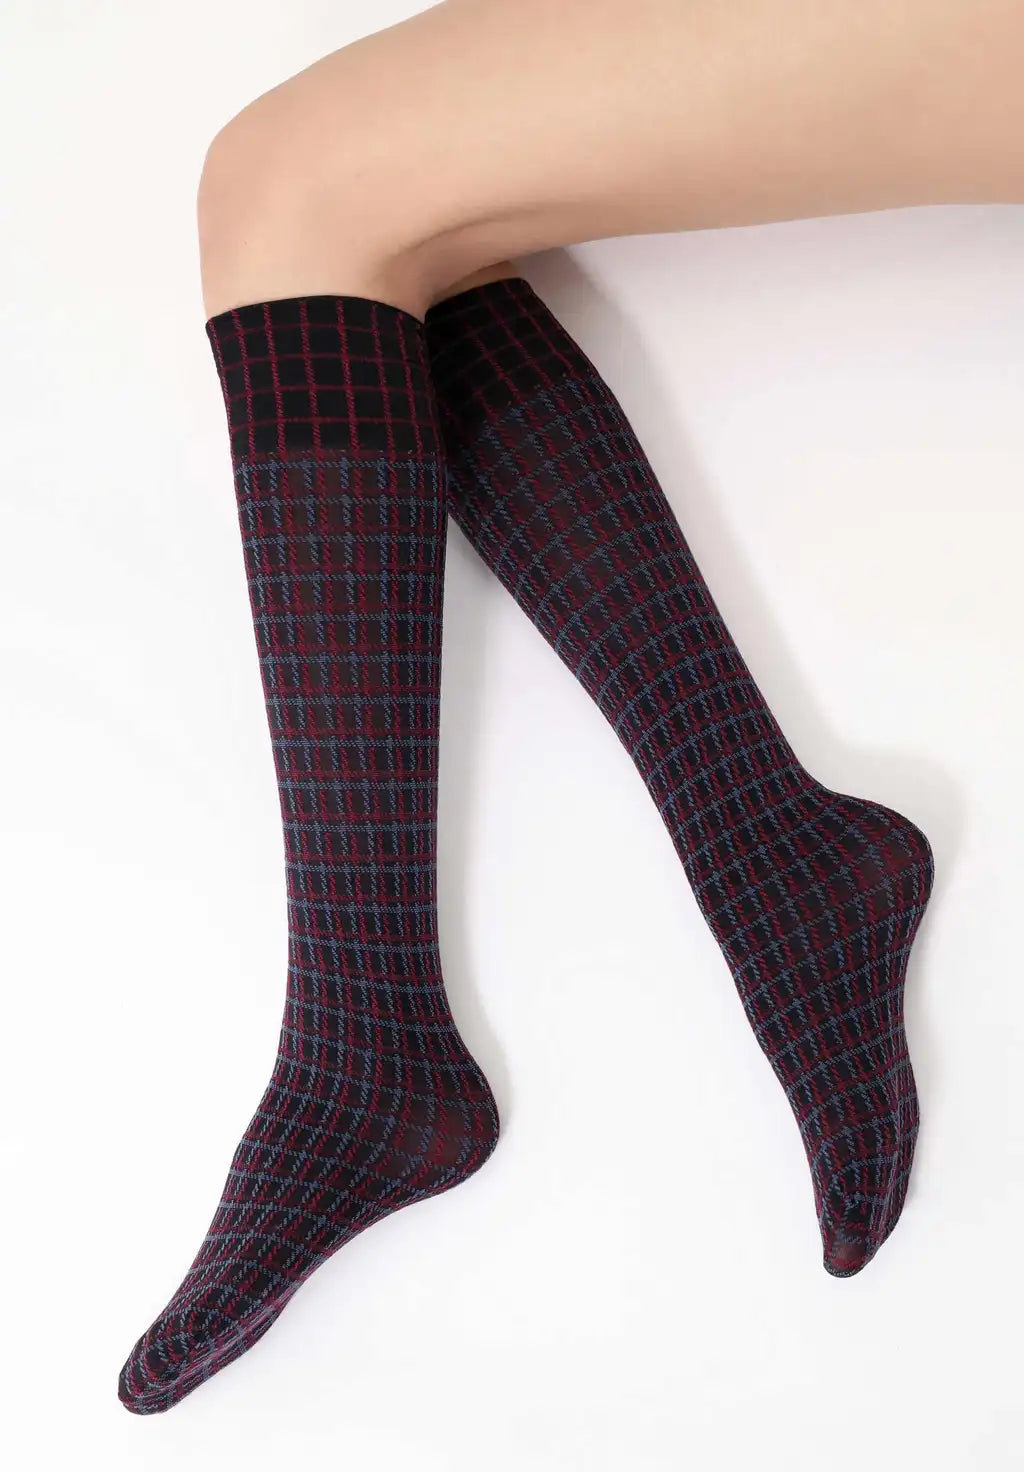 Oroblù Check Gambaletto - Navy opaque fashion knee-high socks with a tartan check style linear pattern in blue and red.